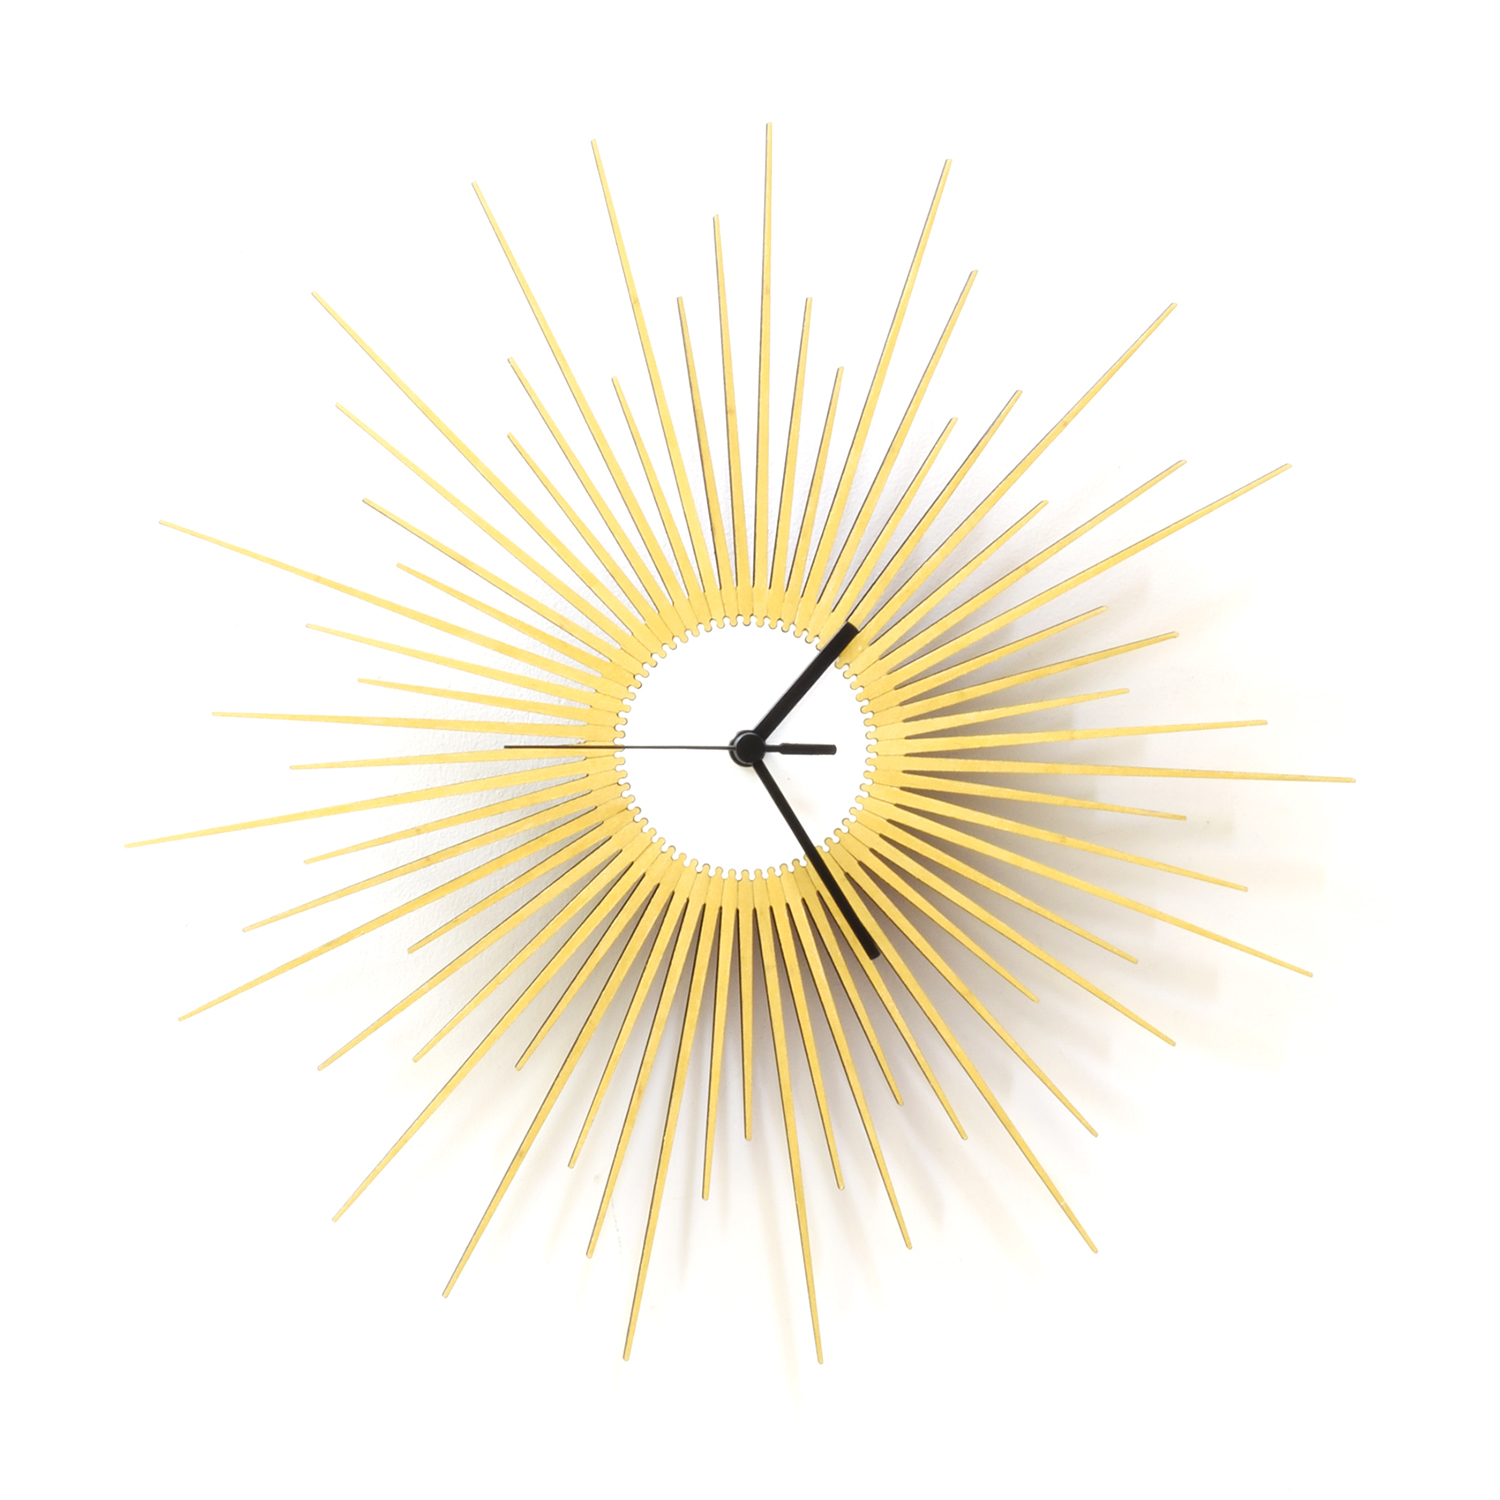 Stylish wooden wall clock with glistening golden paint - The Big Bang